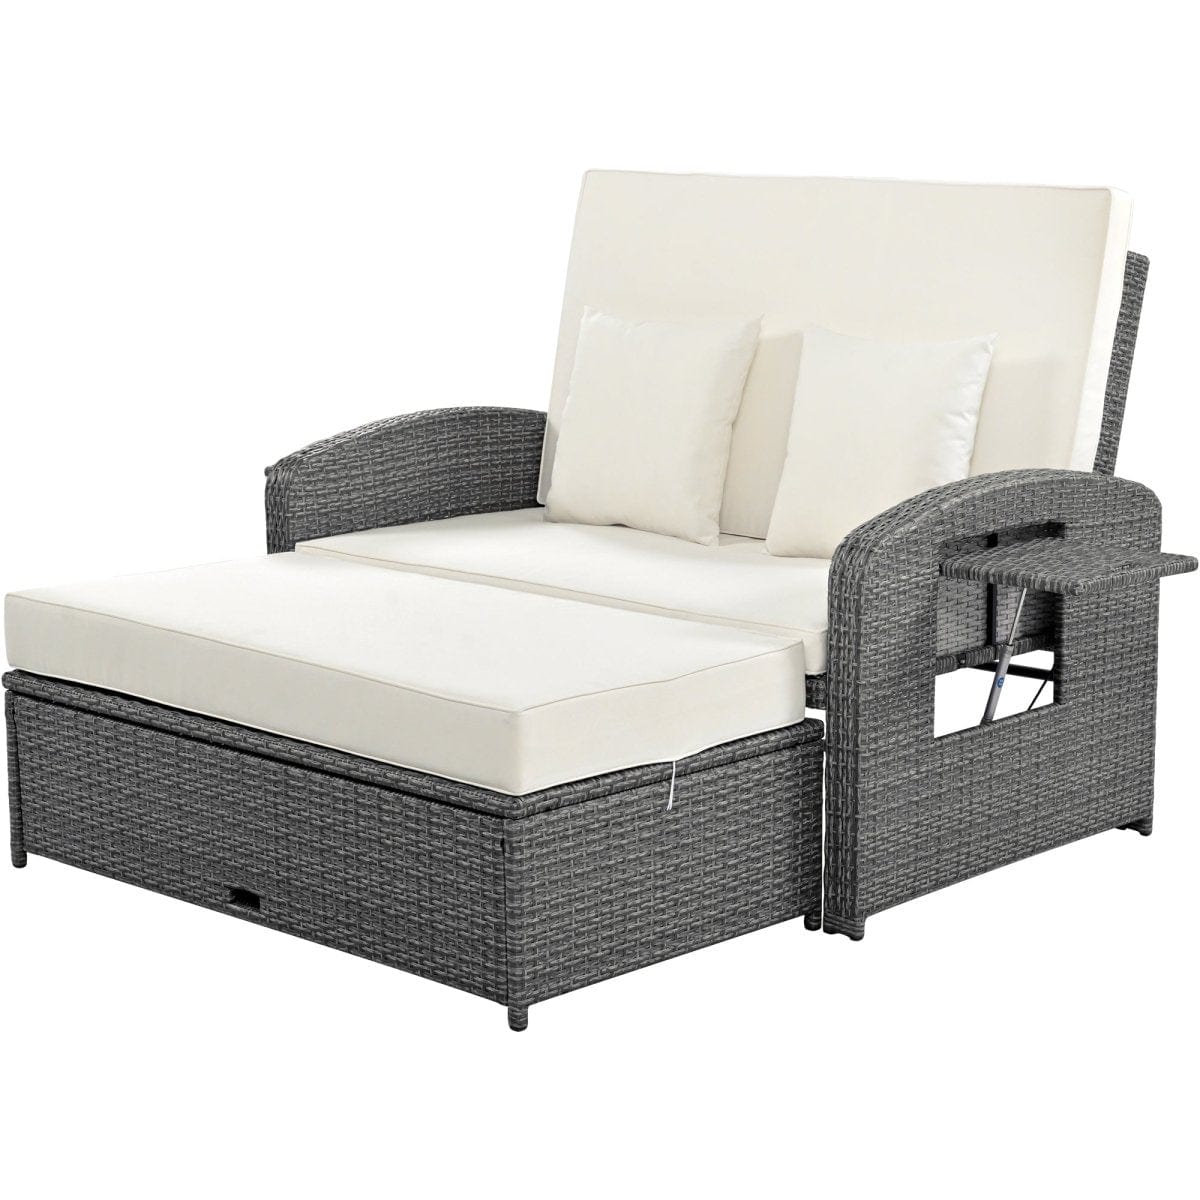 2 Person Outdoor Daybed with Built-in Tables7Topmaxx